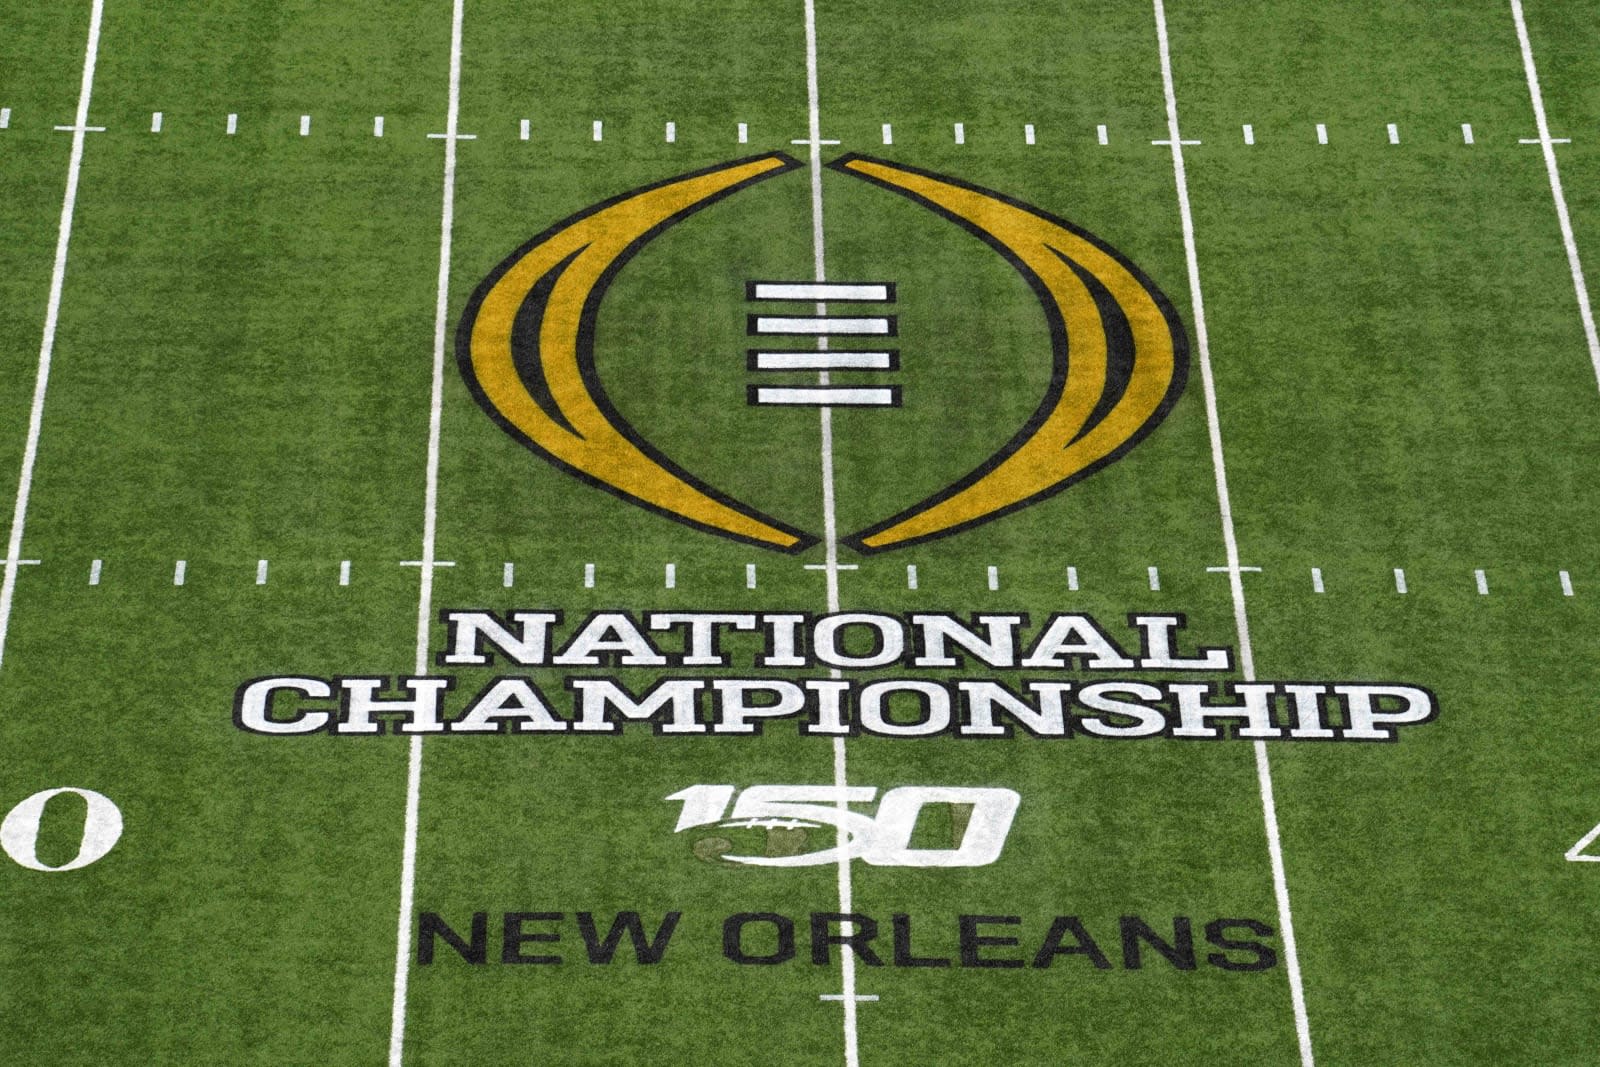 ESPN's 4K National Championship broadcast airs on Comcast, DirecTV and